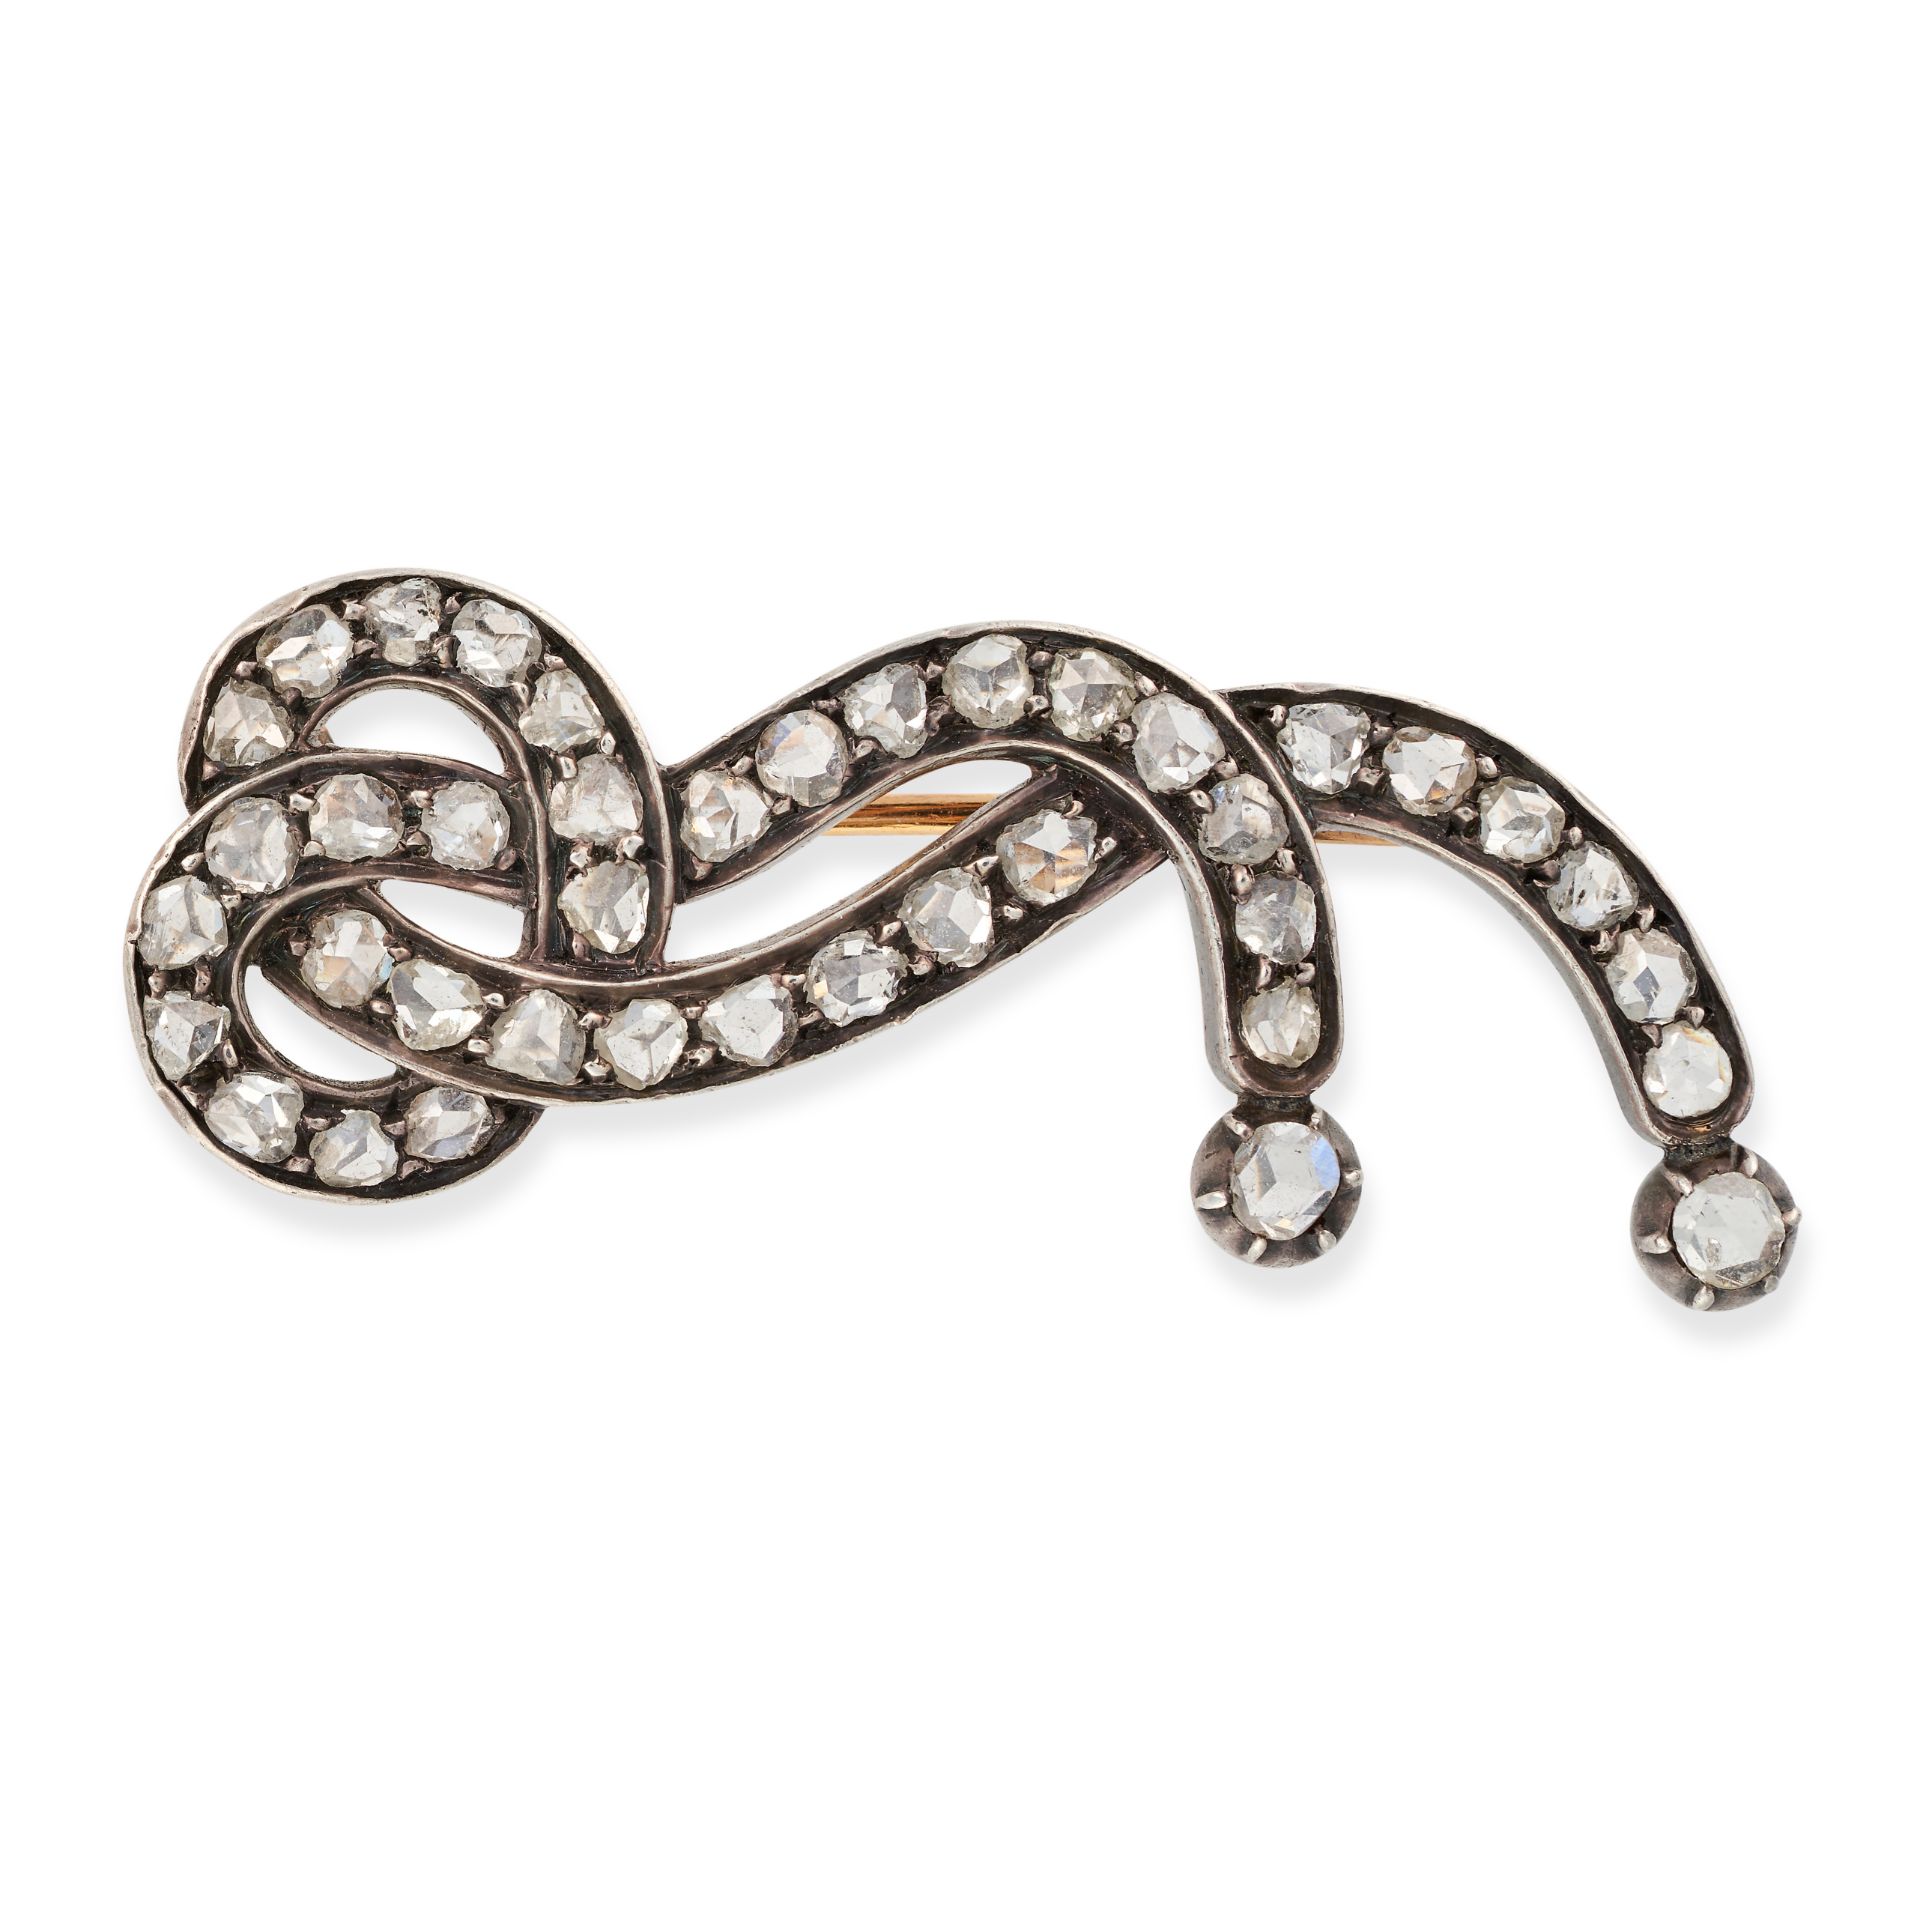 AN ANTIQUE FRENCH DIAMOND LOVER'S KNOT BROOCH in 18ct yellow gold and silver, designed as a lover...